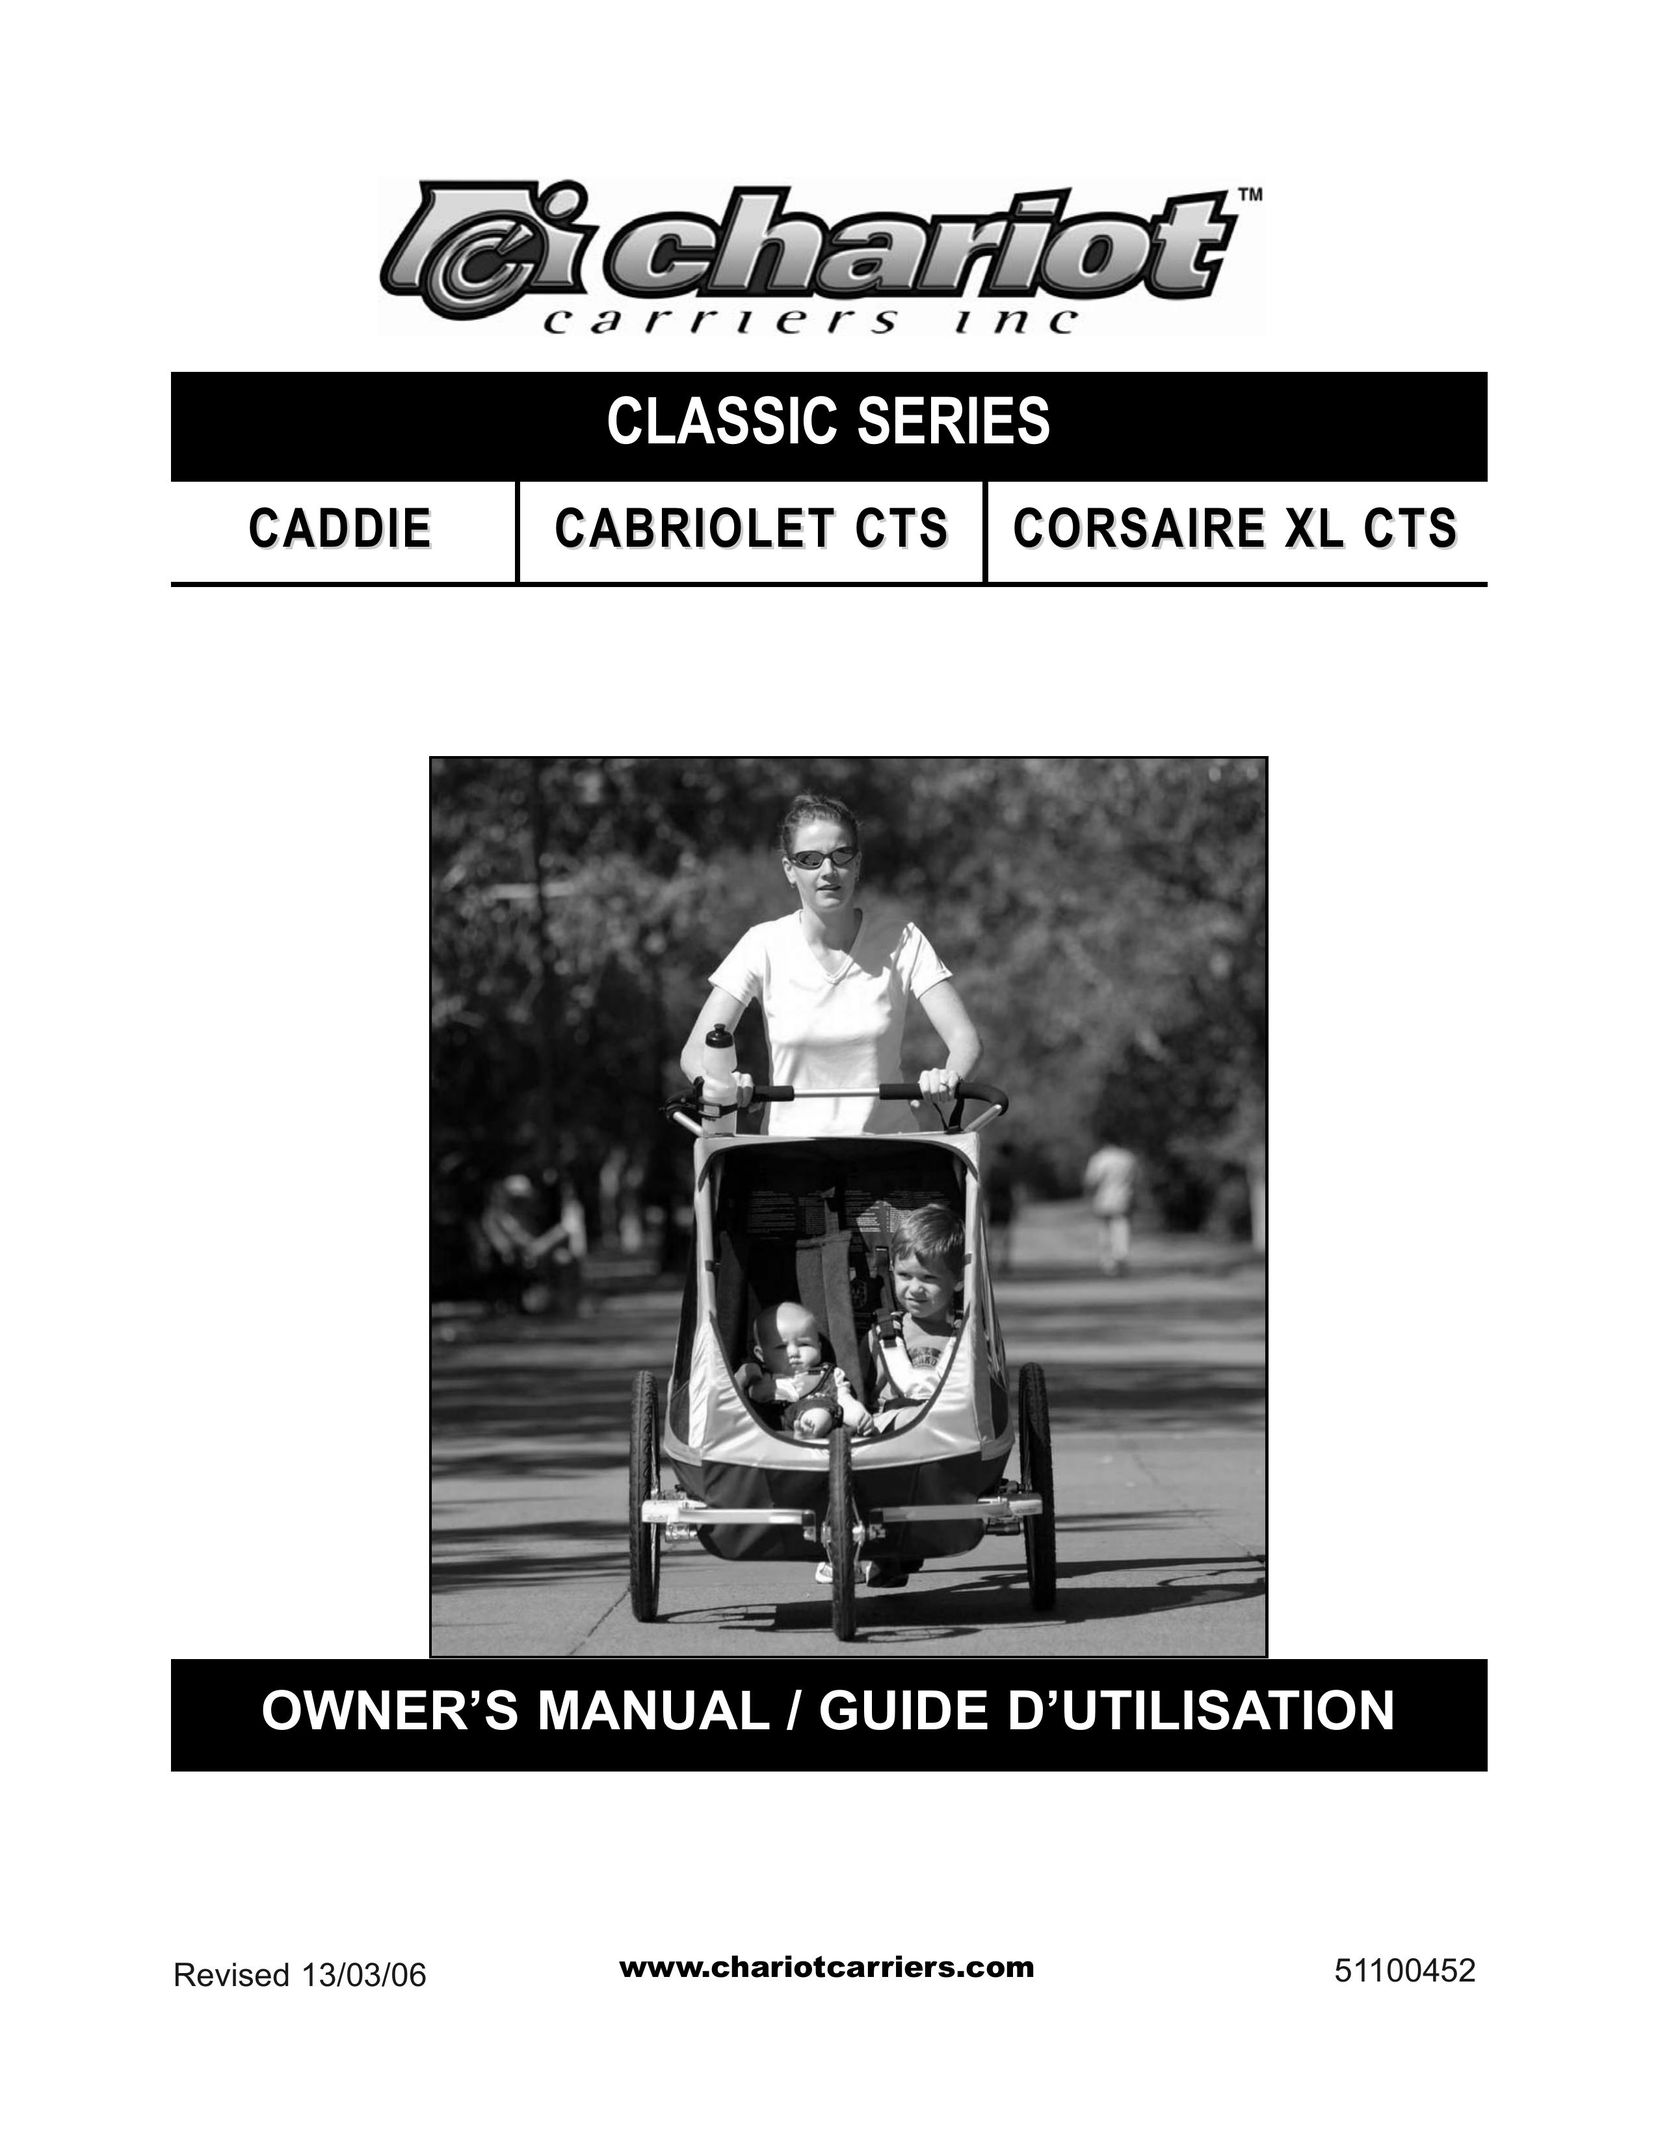 Chariot Carriers CABRIOLET CTS Stroller User Manual